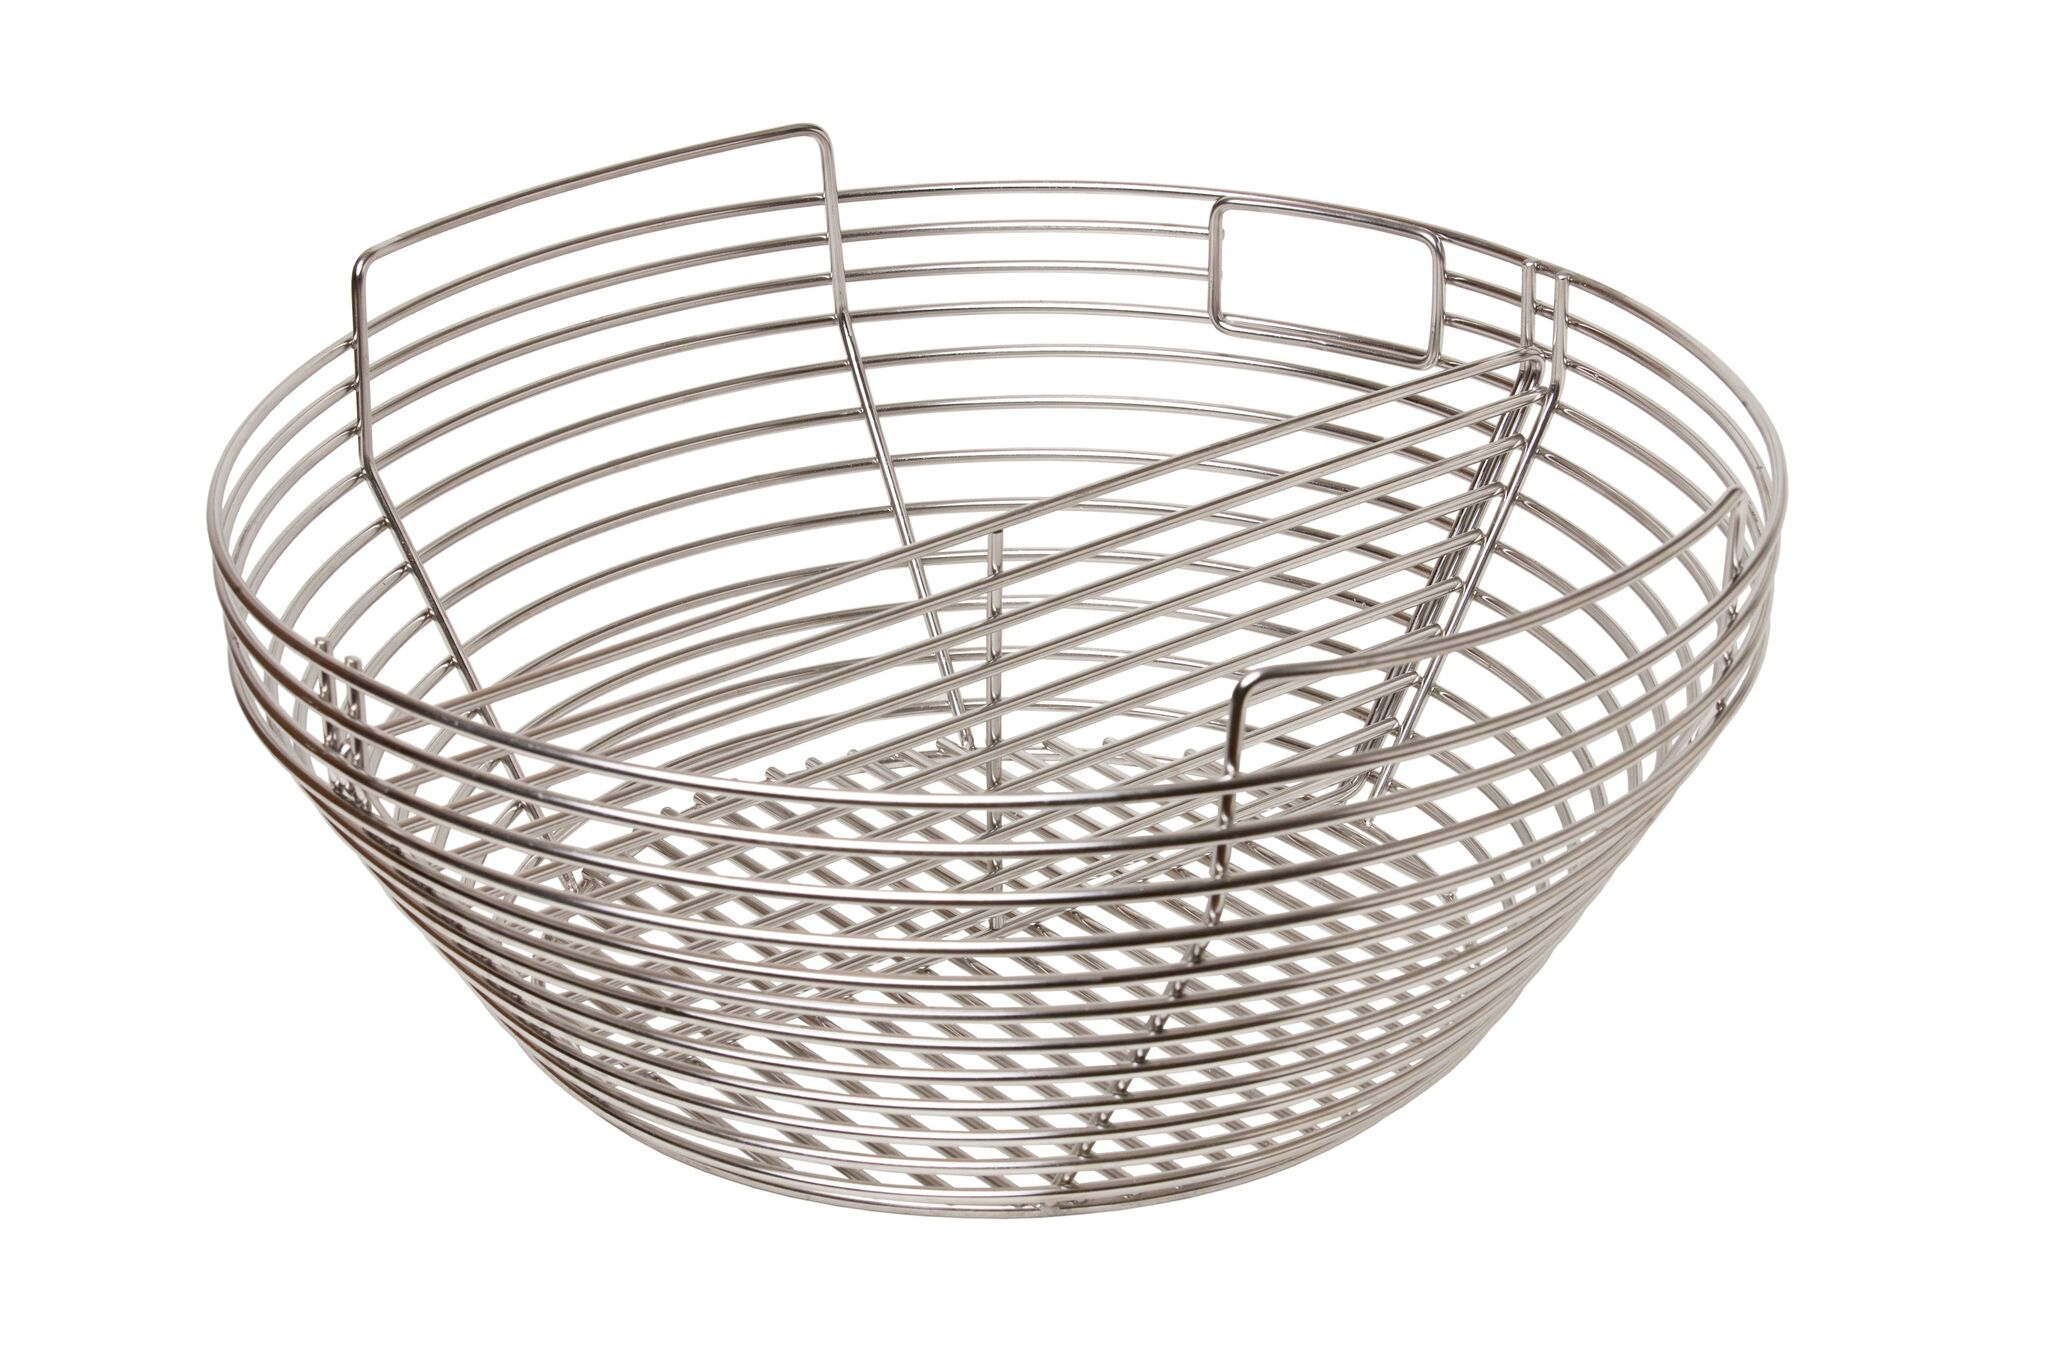 Monolith Charcoal basket with Divider for Le Chef